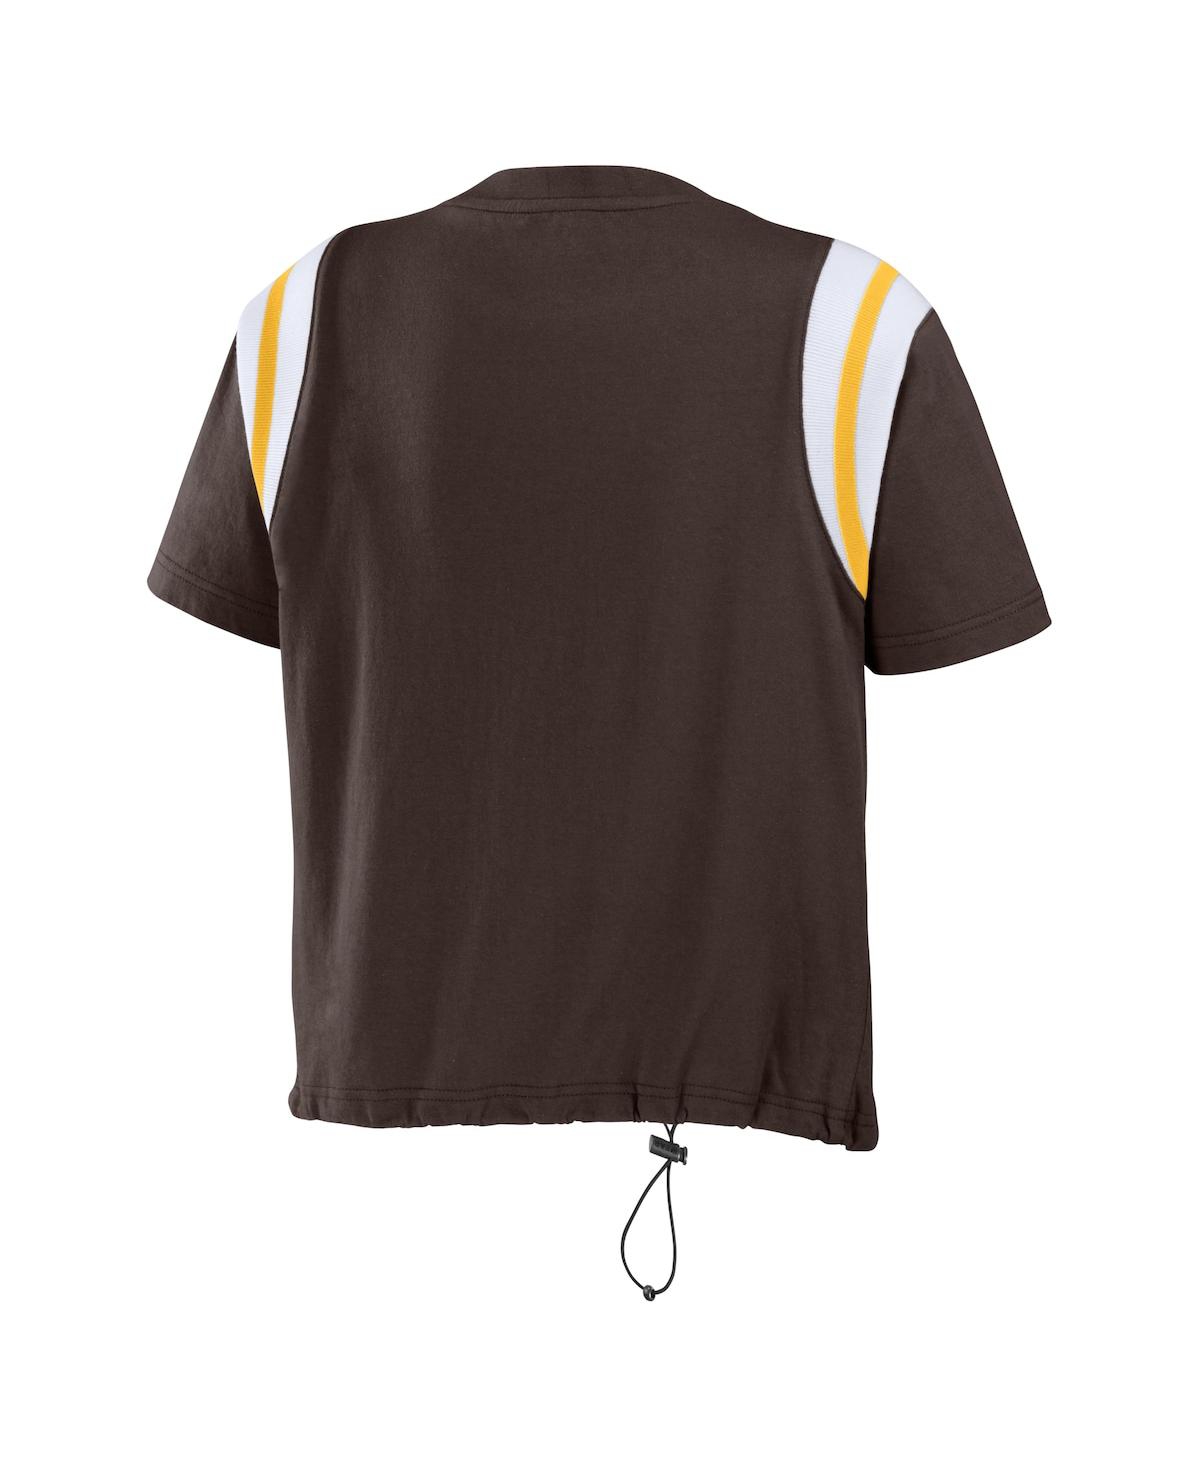 Shop Wear By Erin Andrews Women's  Brown Distressed San Diego Padres Cinched Colorblock T-shirt